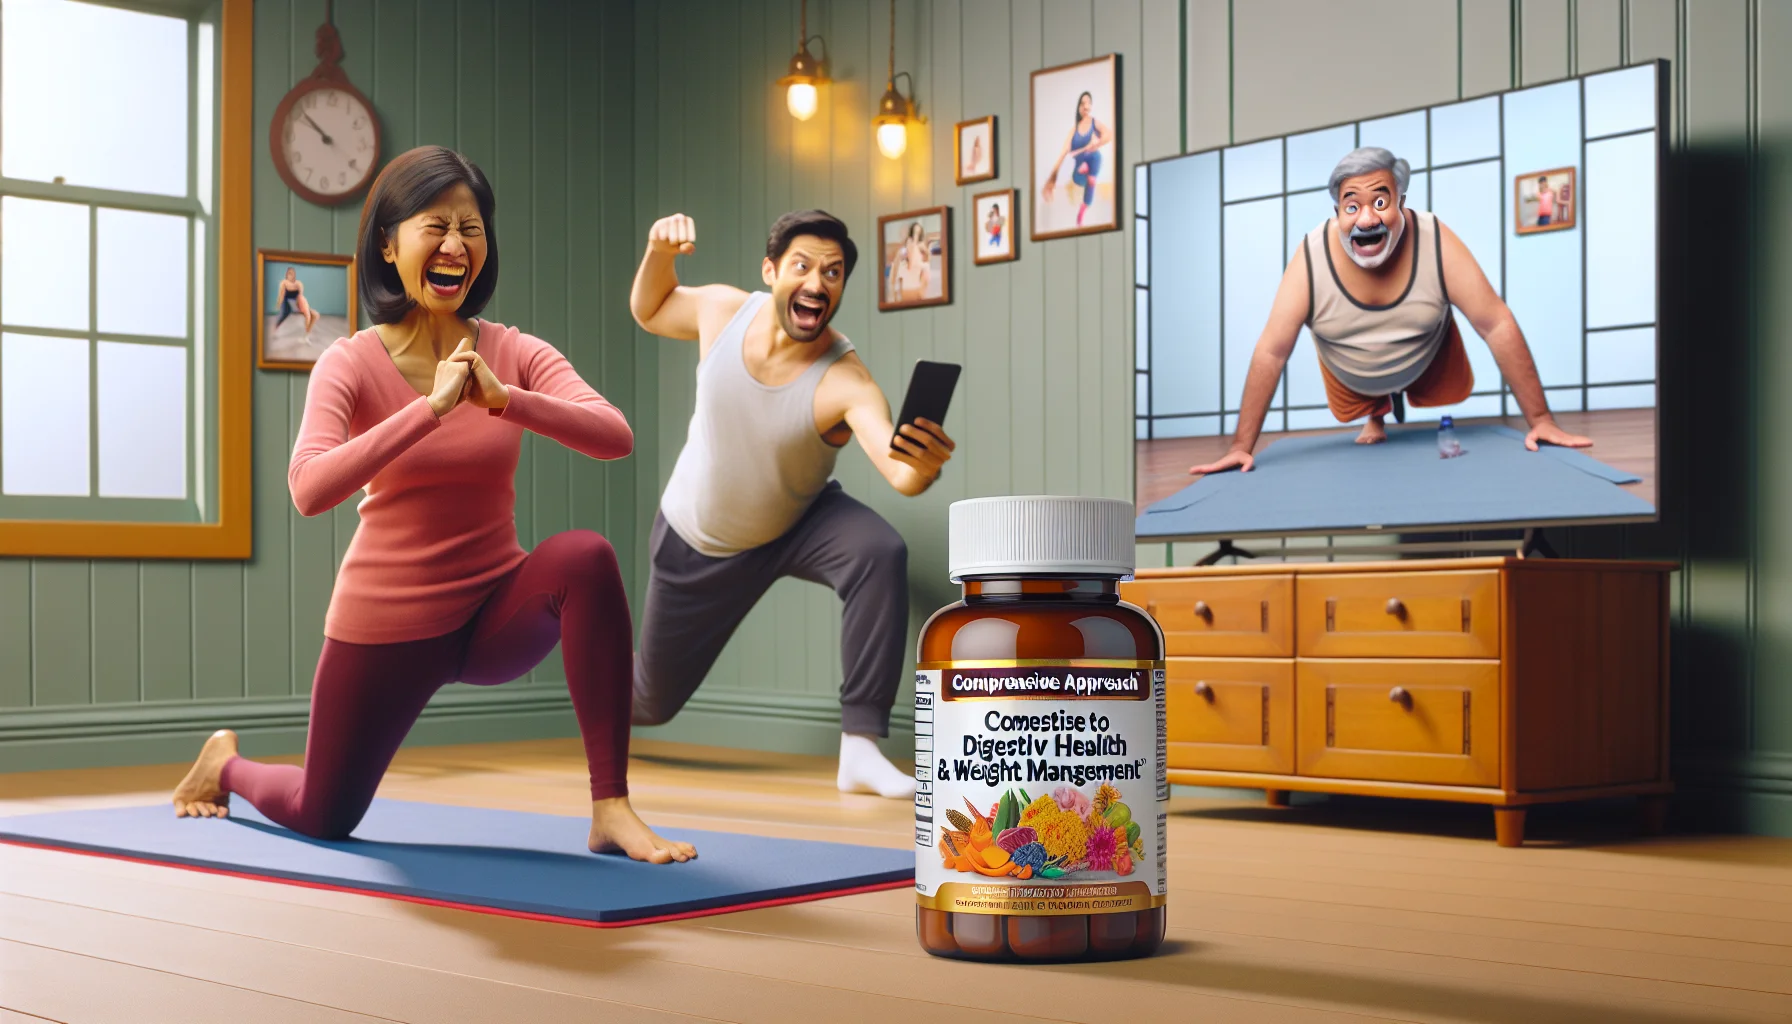 Create a humorous scene depicting an exercise scenario that links to digestive health and weight management. Show a product labeled 'Comprehensive Approach to Digestive Health & Weight Management'. In the scene, a South Asian woman is doing yoga on a colorful mat and next to her is a bottle of the product. The woman is laughing while in a challenging pose. In the background, a Caucasian man is attempting to follow along with a workout video on TV, but is comically out of sync. The bottle is strategically placed so that both individuals appear to be promoting it.